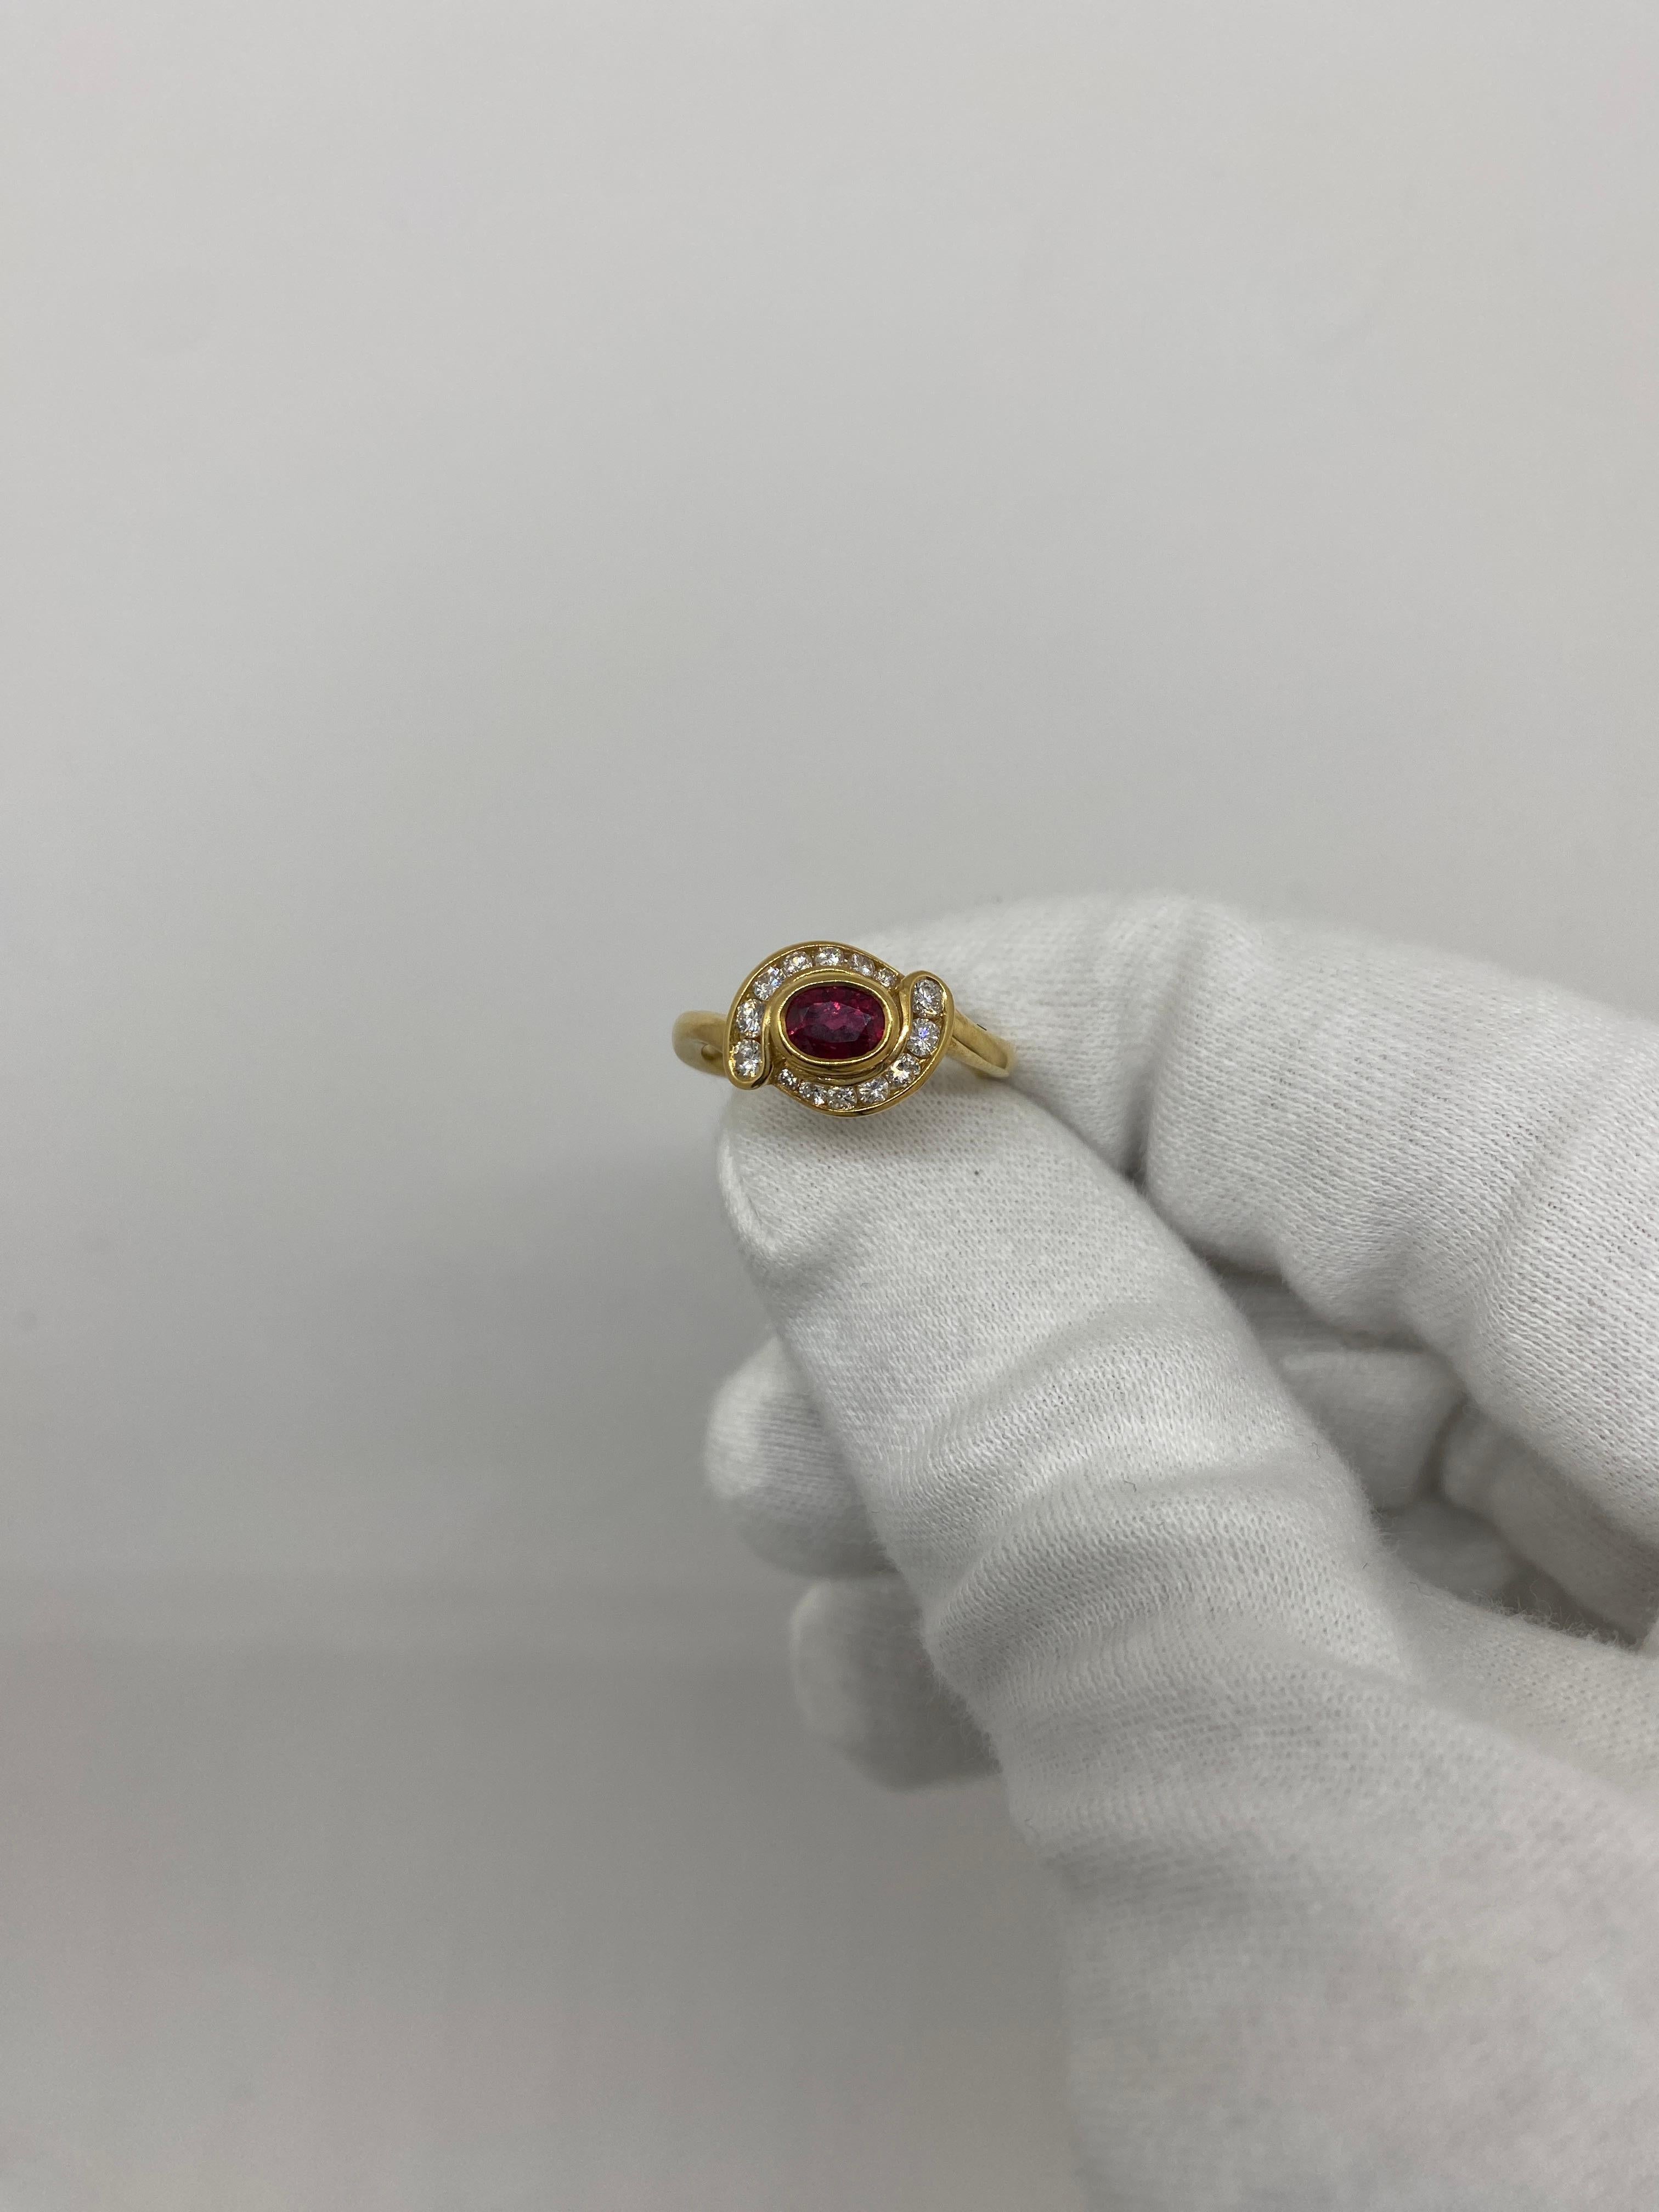 Ring made of 18kt yellow gold with oval-cut natural ruby for ct.0.73 and natural white brilliant-cut diamonds for ct.0.41

Welcome to our jewelry collection, where every piece tells a story of timeless elegance and unparalleled craftsmanship. As a